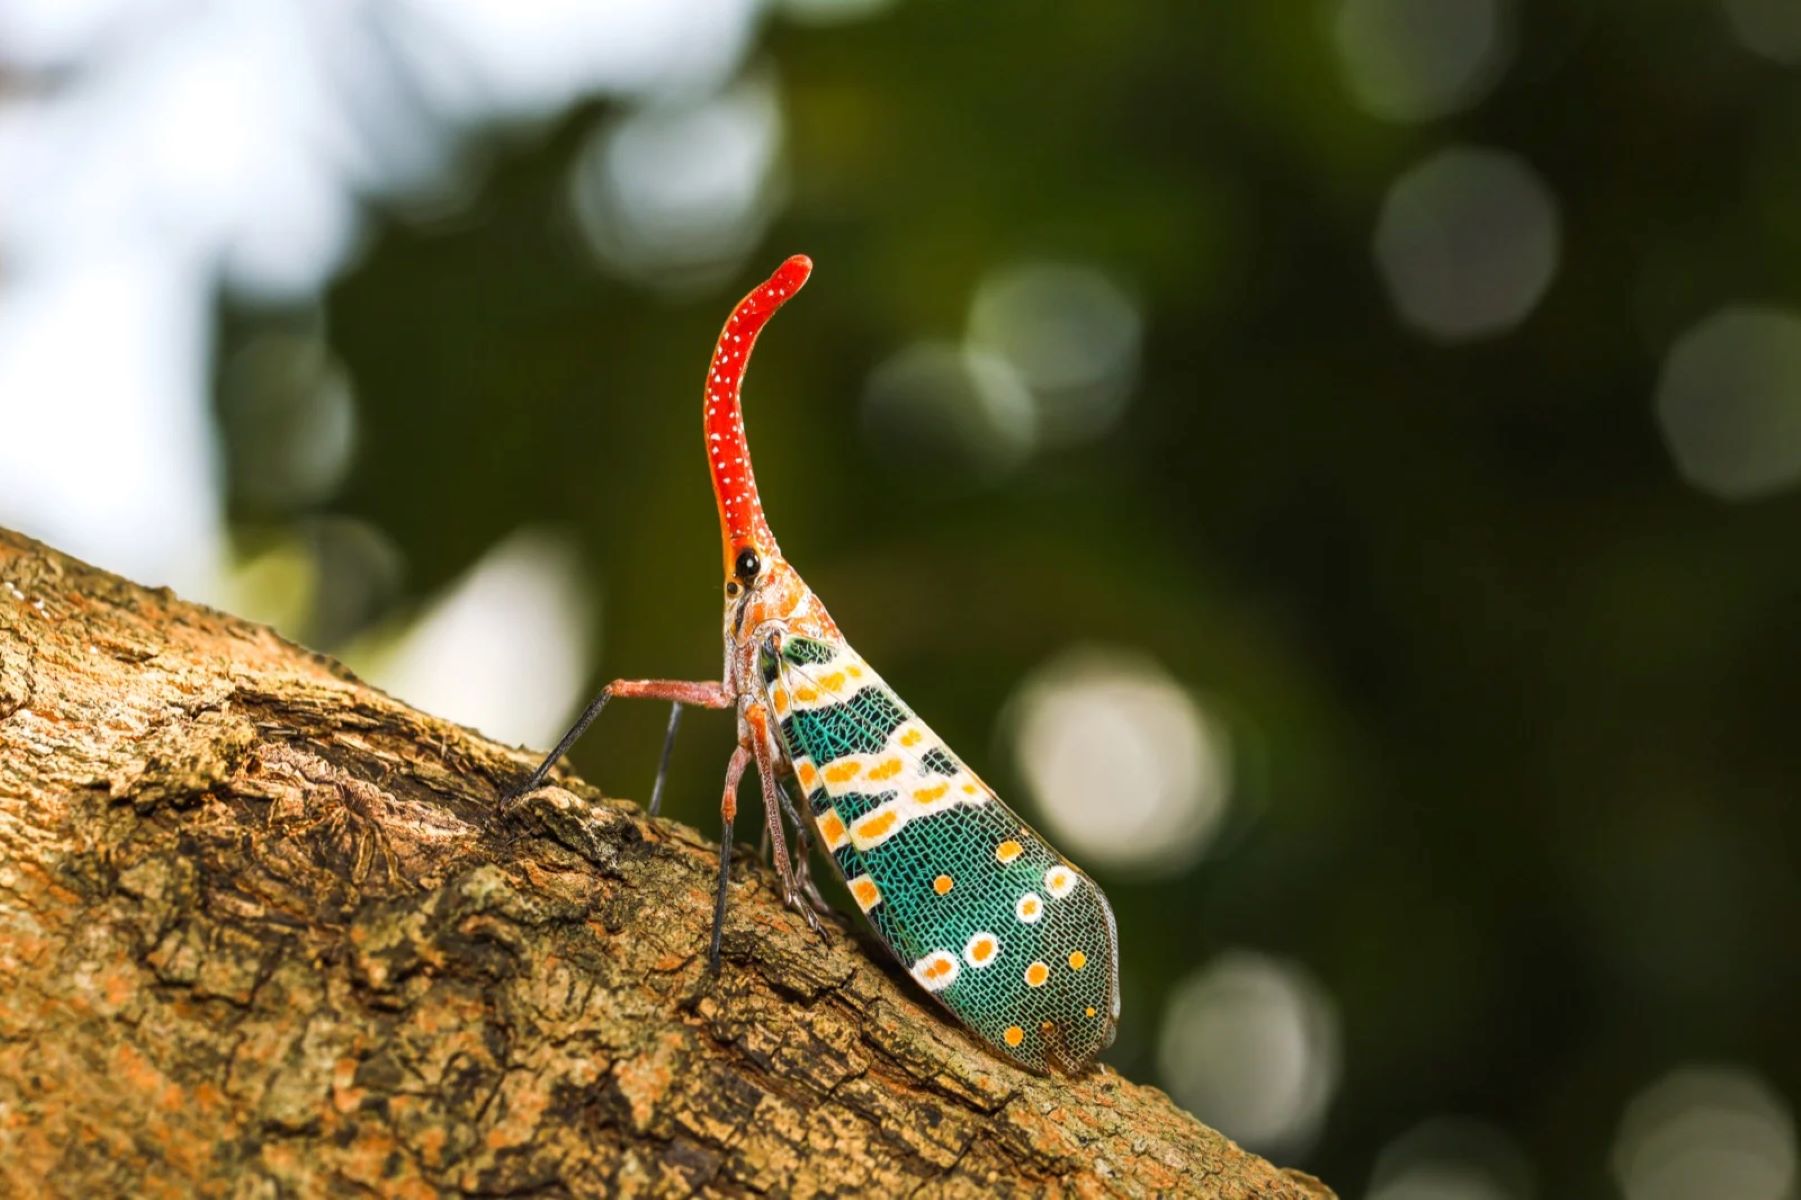 Discover The Fascinating World Of Long, Leggy Bugs!